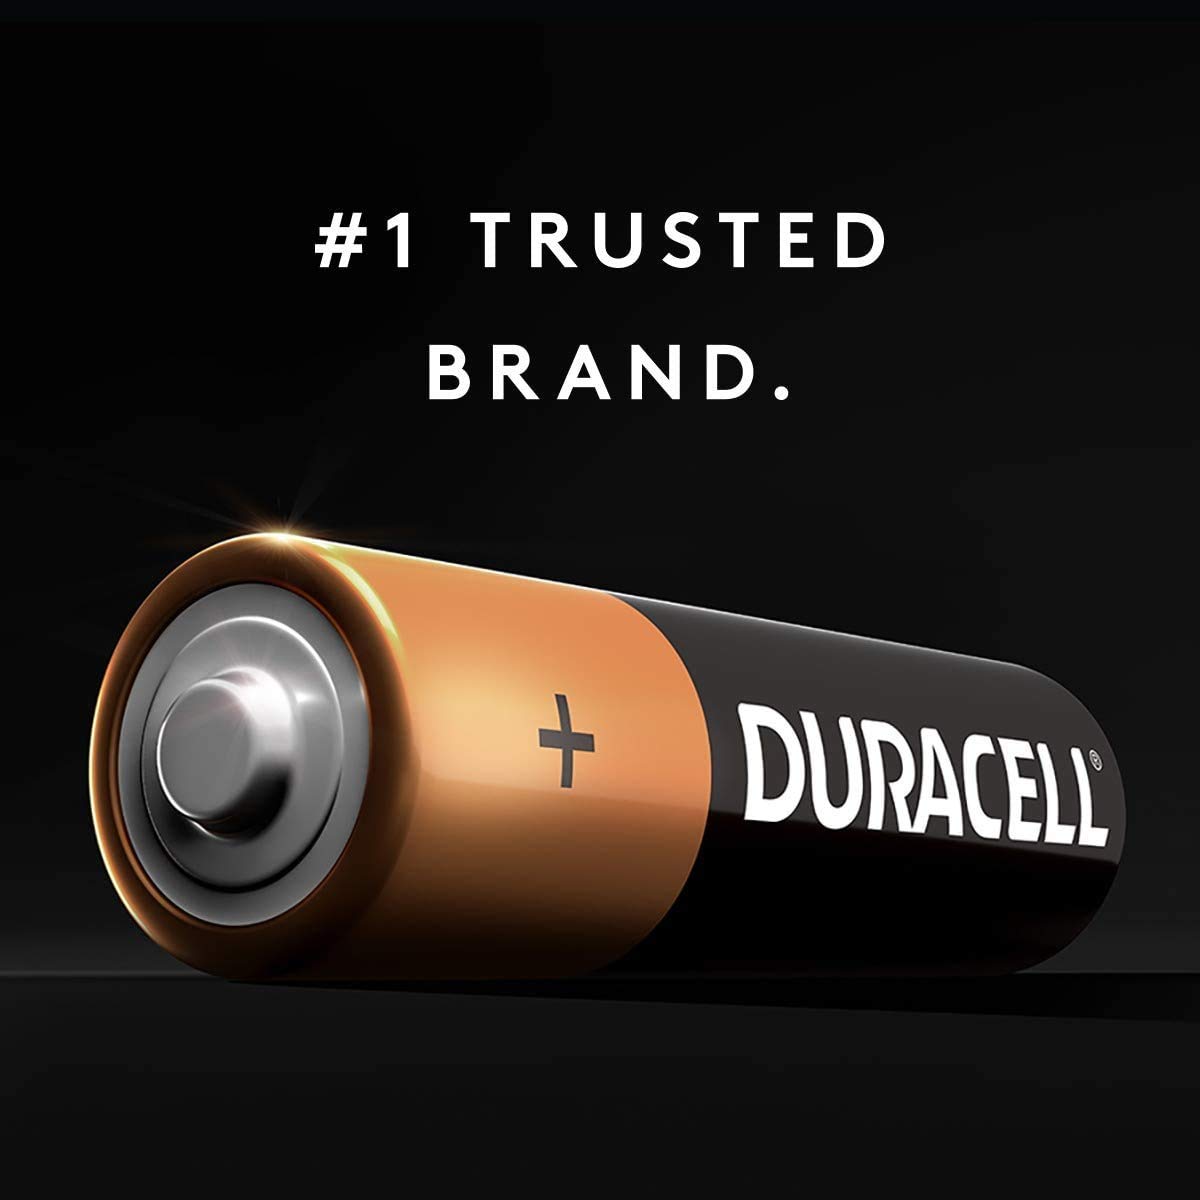 DURACELL - CopperTop AA Alkaline Batteries, Long Lasting, All-Purpose Double A Battery for Business and Home